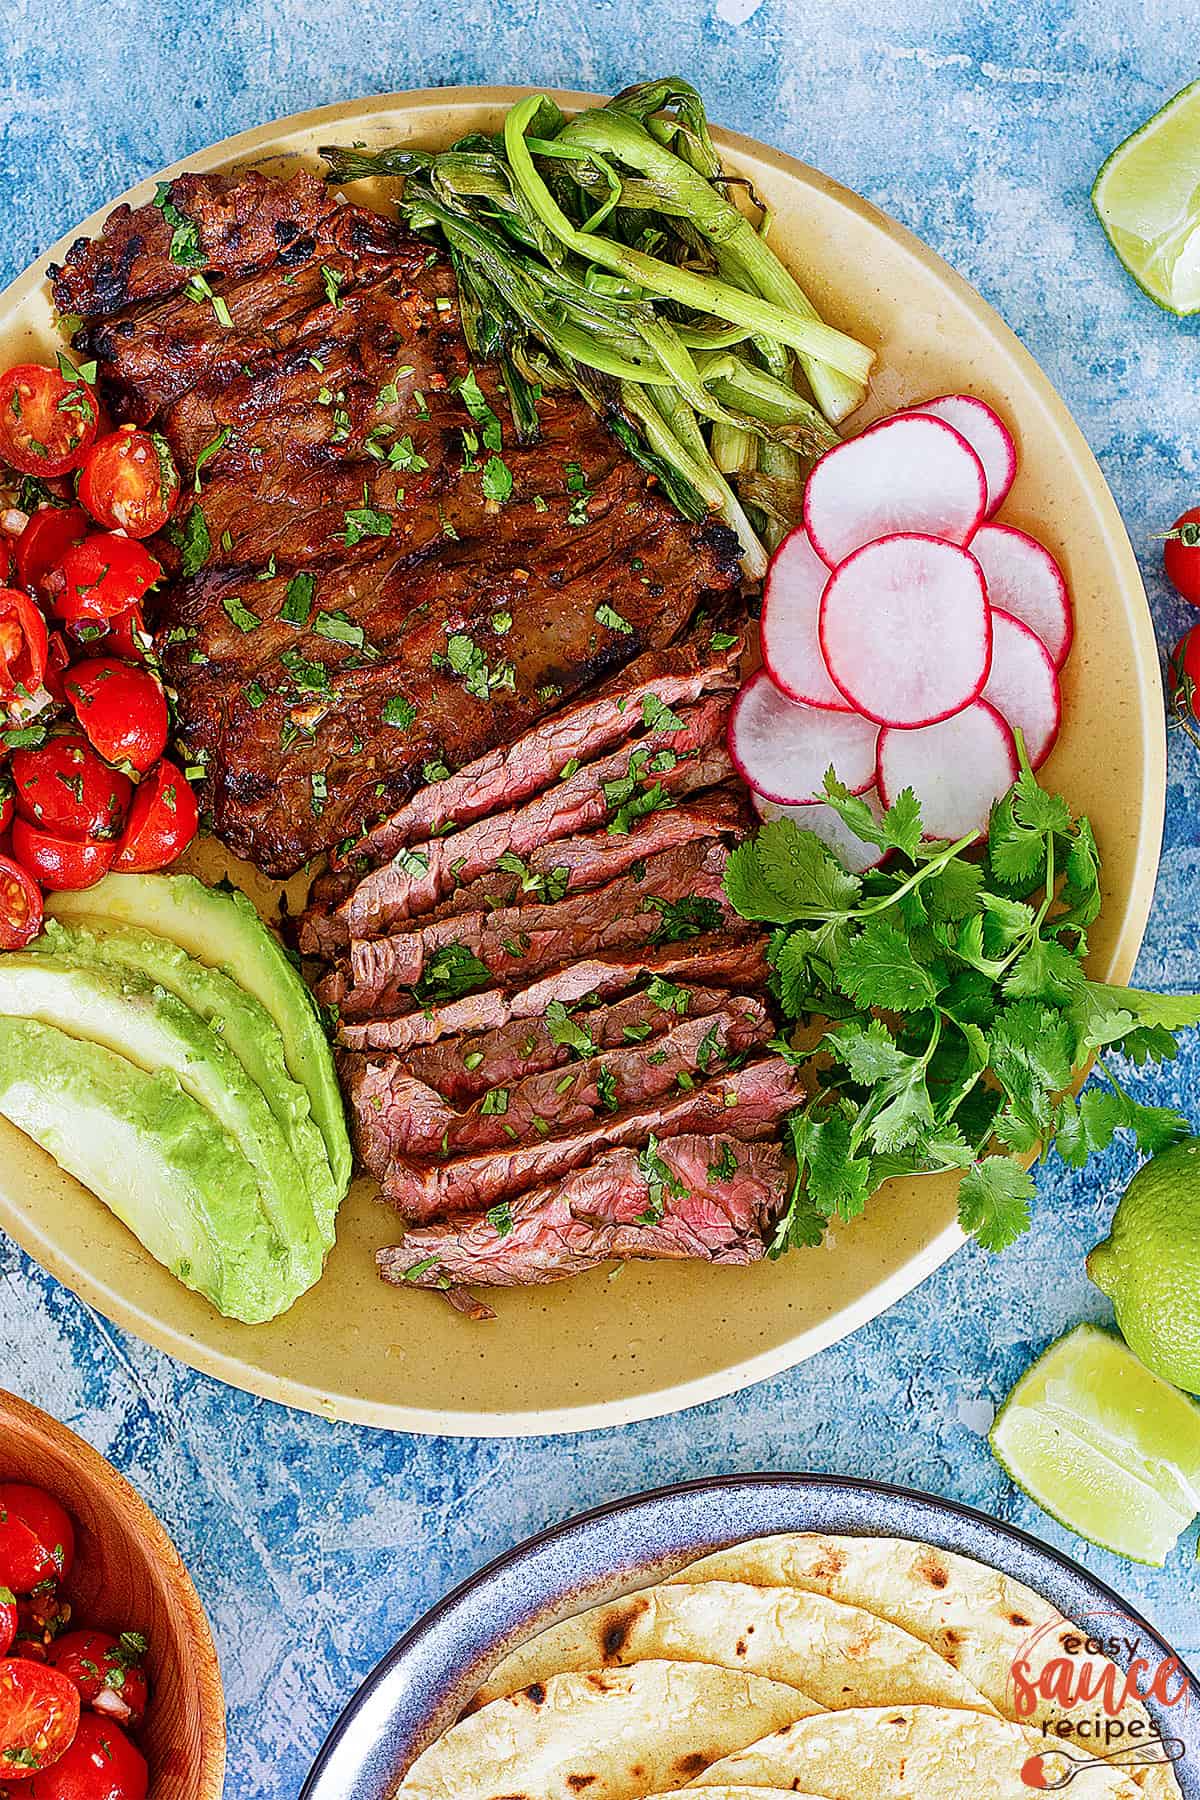 Carne asada meat sliced on a plate with vegetables